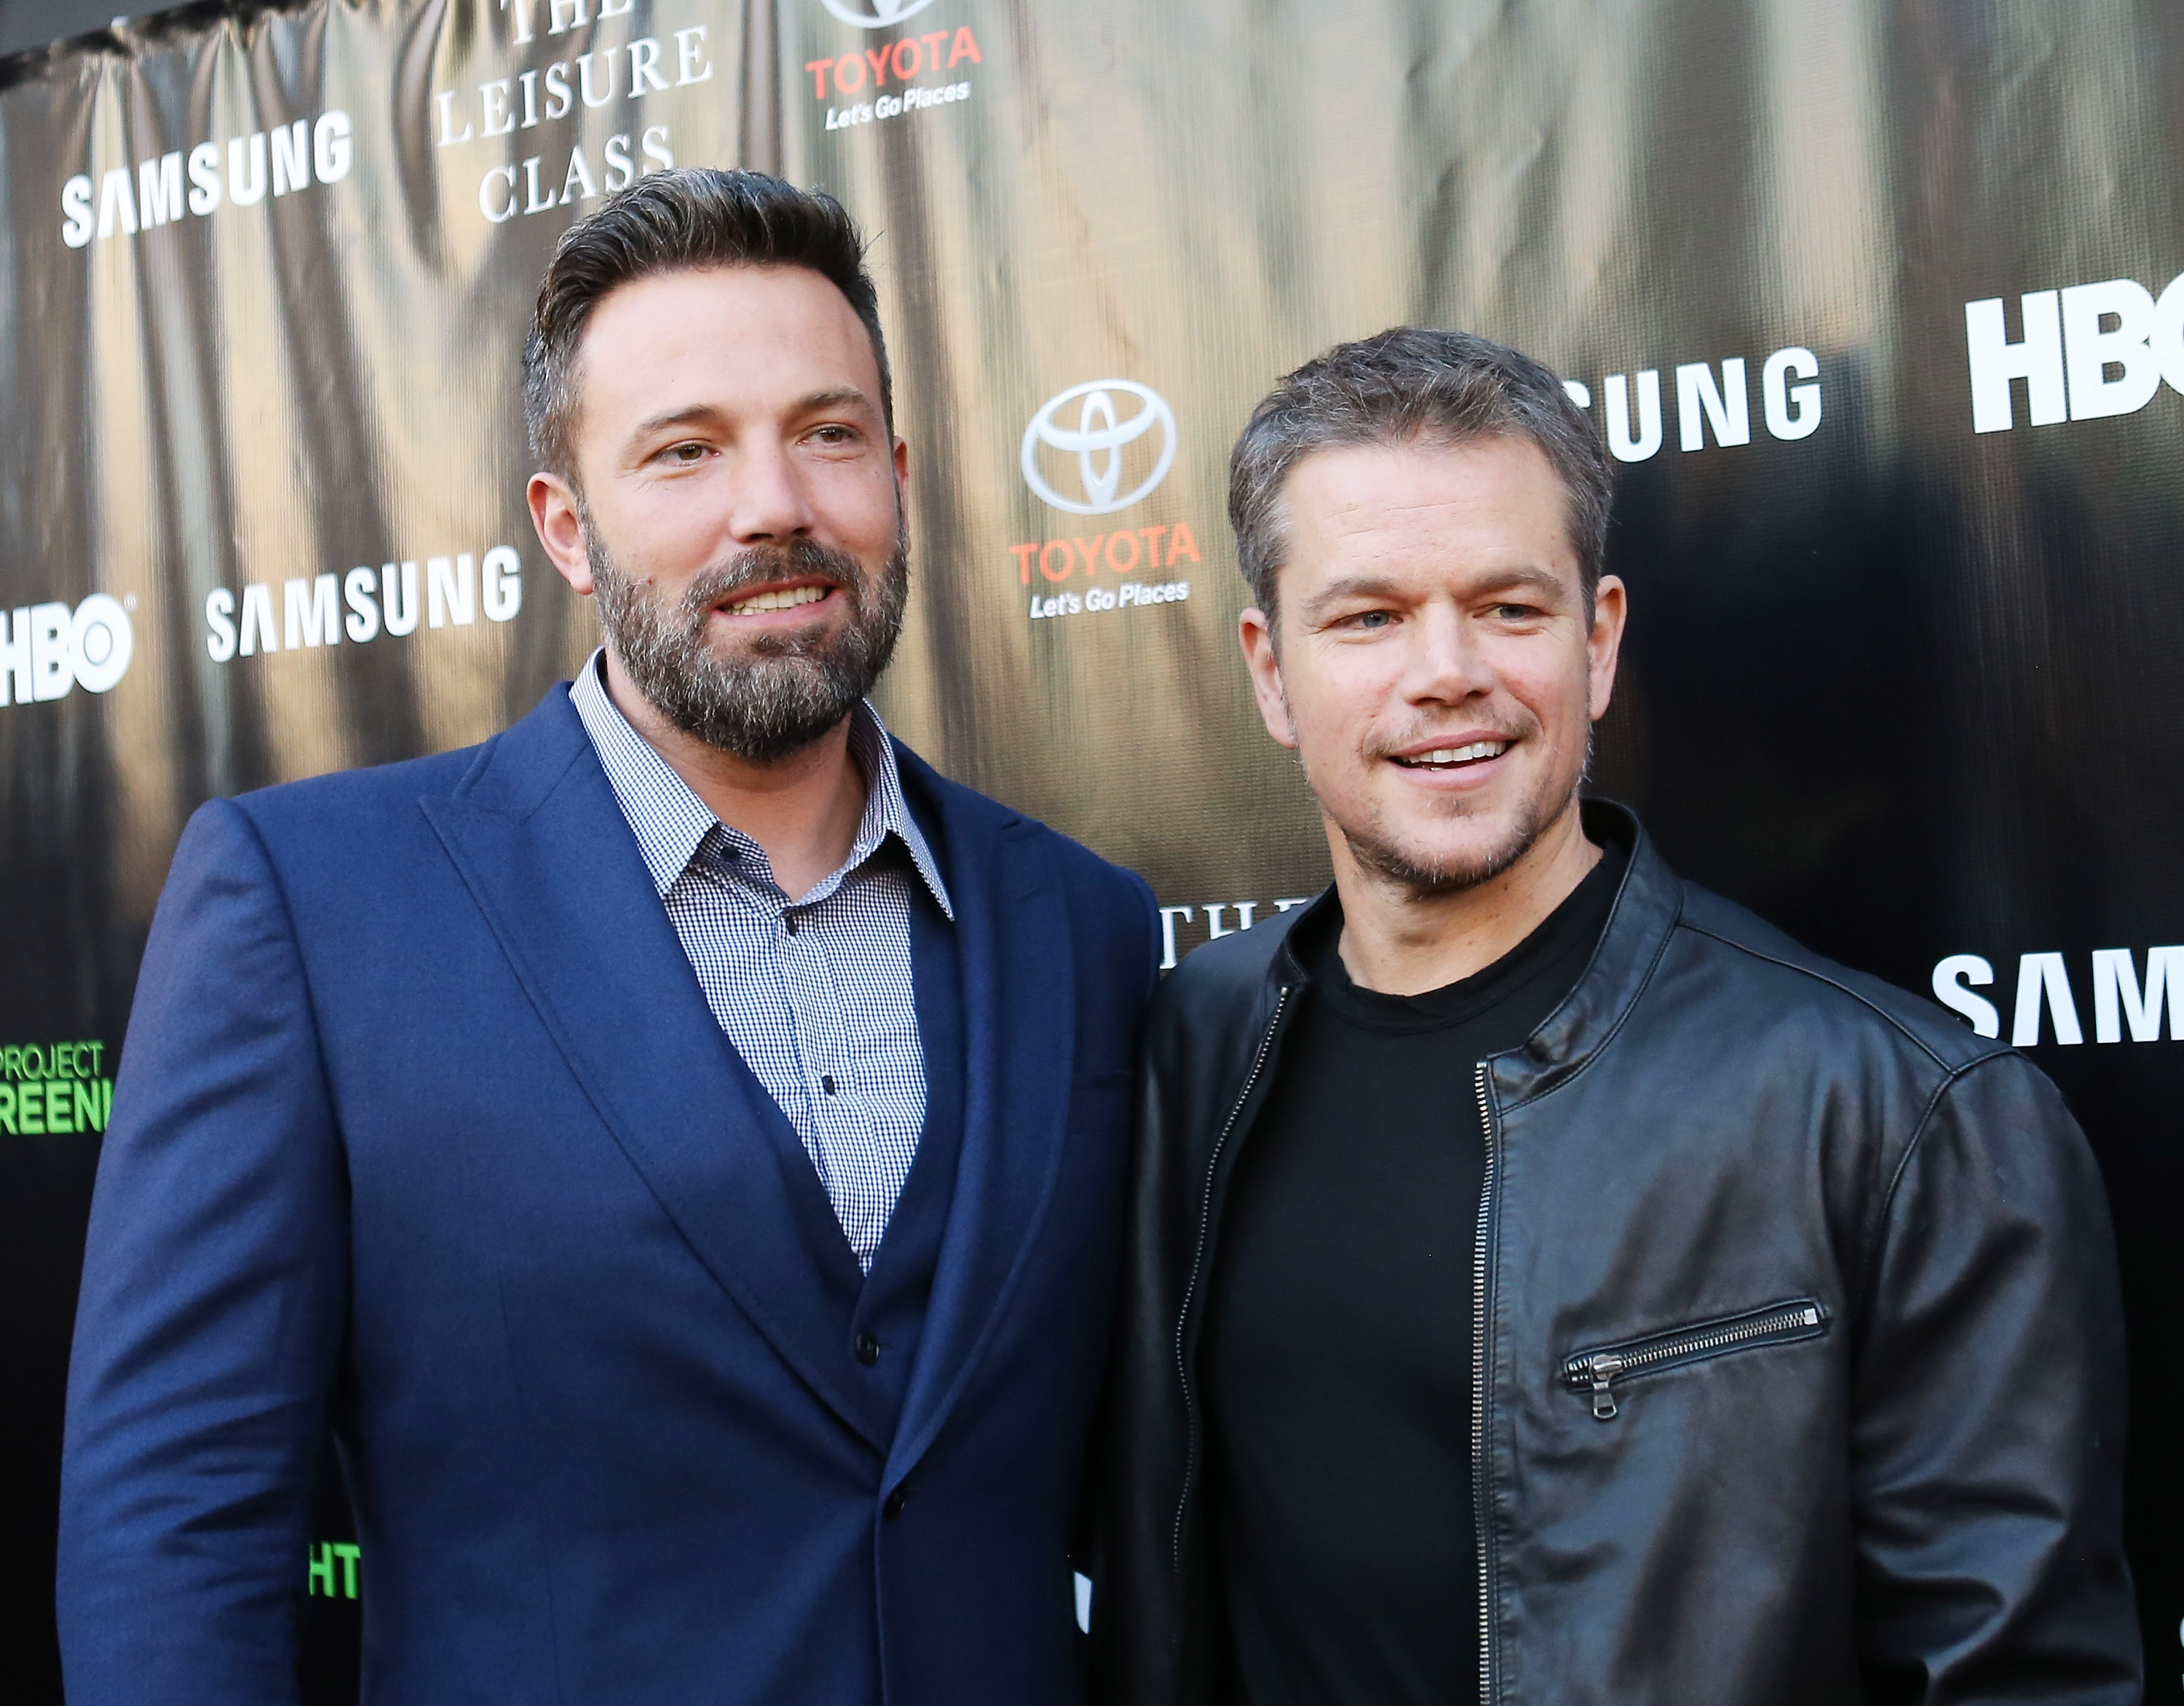 Ben Affleck (L) and Matt Damon arrive at HBO presents The Project Greenlight season 4 winning film "The Leisure Class" held at The Theatre - The Ace Hotel on August 10, 2015 in Los Angeles, California. (Michael Tran—FilmMagic)